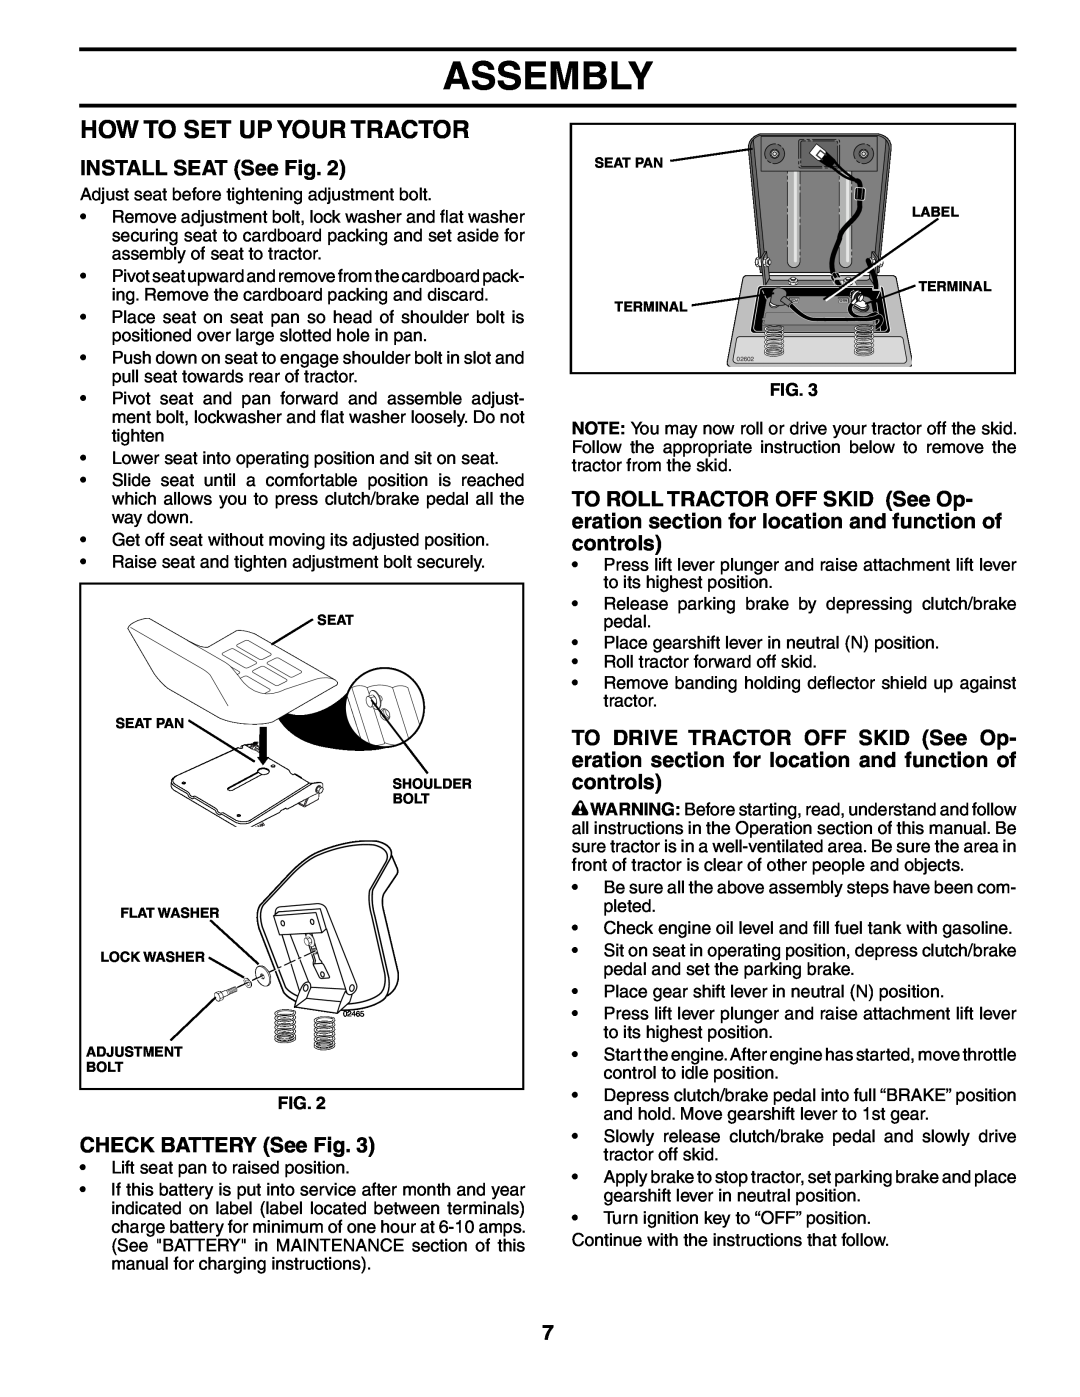 Poulan PO17542STC manual How To Set Up Your Tractor, INSTALL SEAT See Fig, CHECK BATTERY See Fig, Assembly 